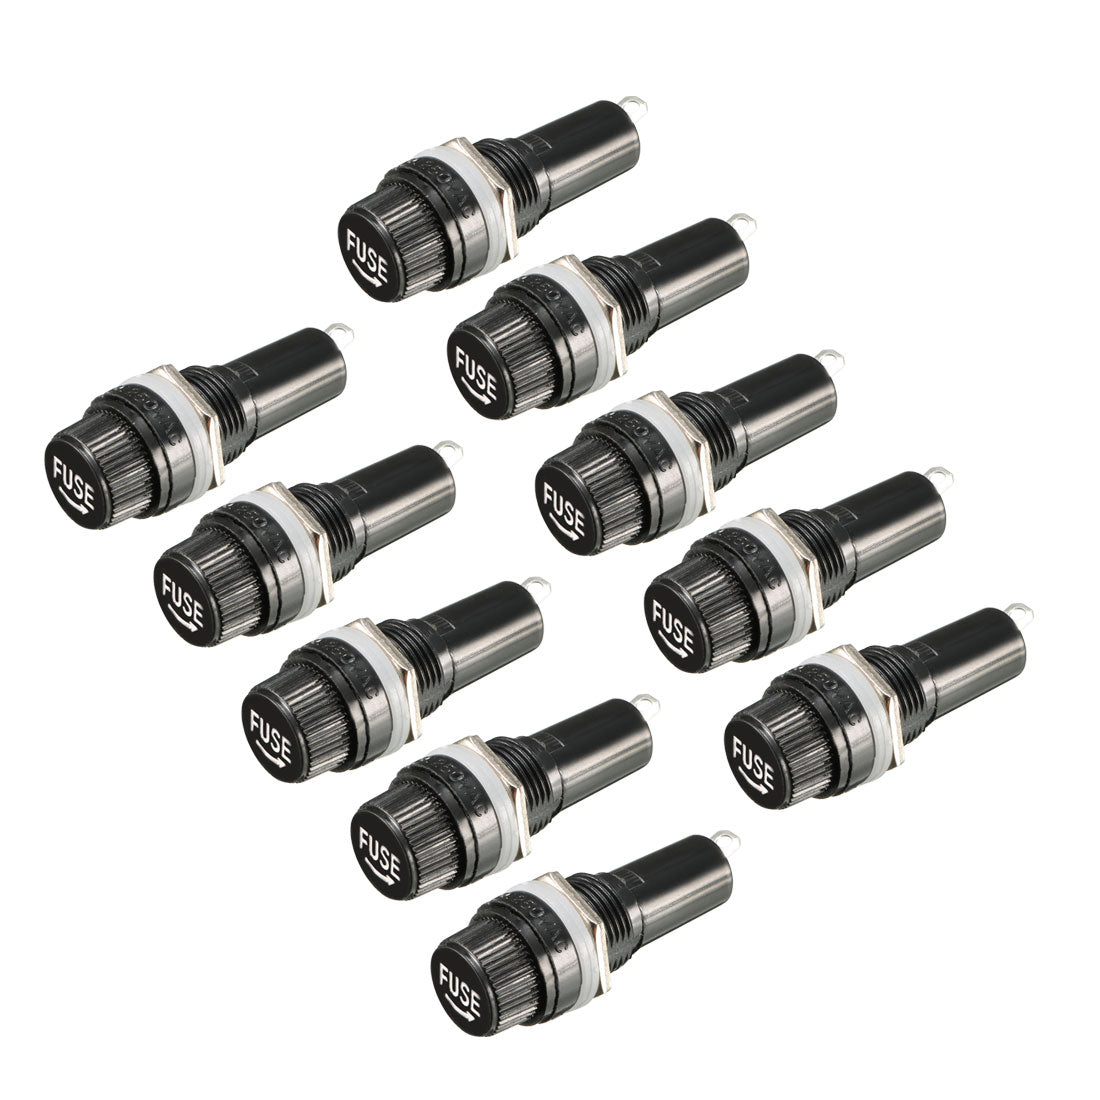 Uxcell Uxcell 10pcs AC 10A 250V 6mm x 30mm Black Electrical Panel Mounted Screw Cap Fuse Holder